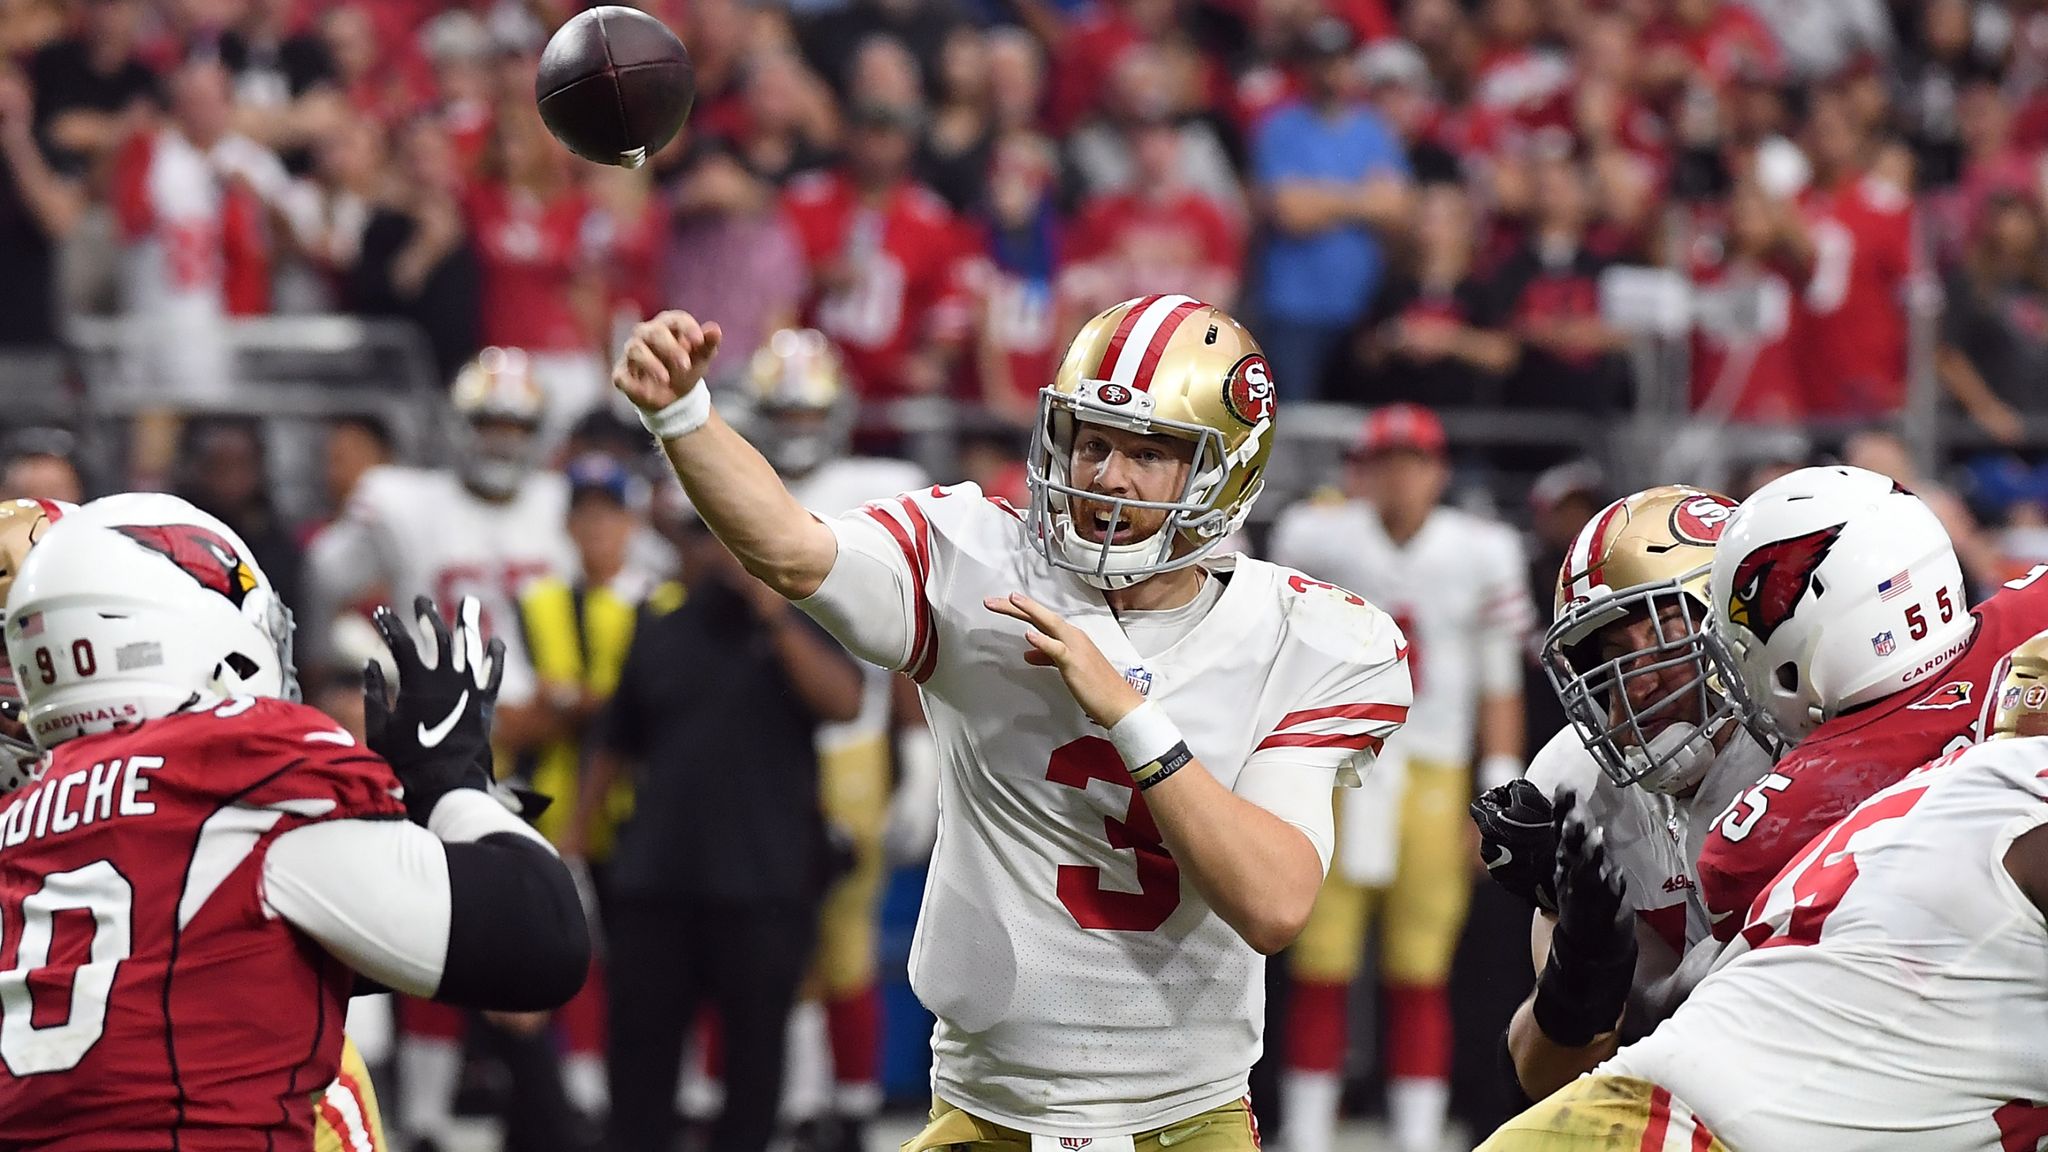 Seahawks-49ers Delivered the Monday-Night Classic We've Craved